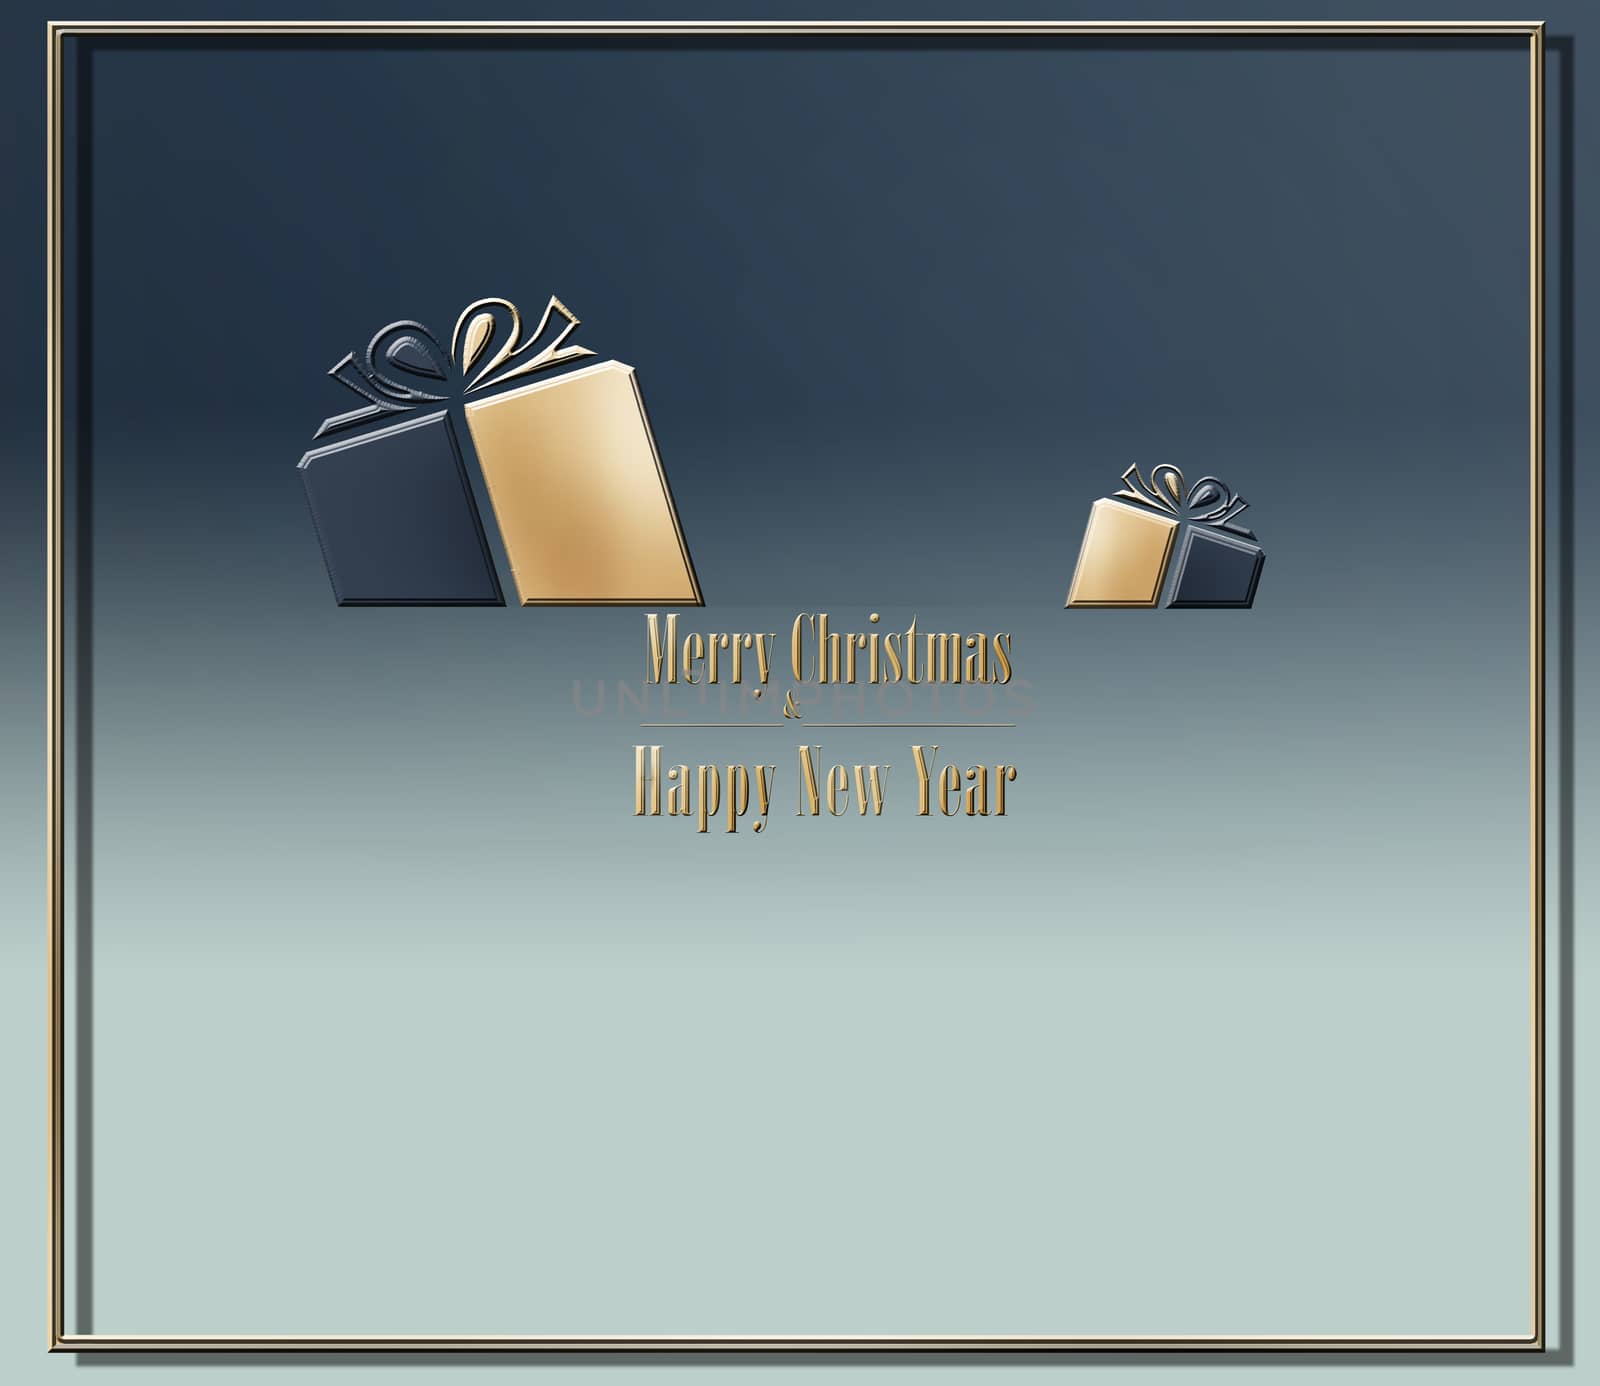 Elegant luxury contemporary Merry Christmas Happy New Year card with blue black gift boxes and text Merry Christmas and Happy New Year on pastel blue background. 3D illustration